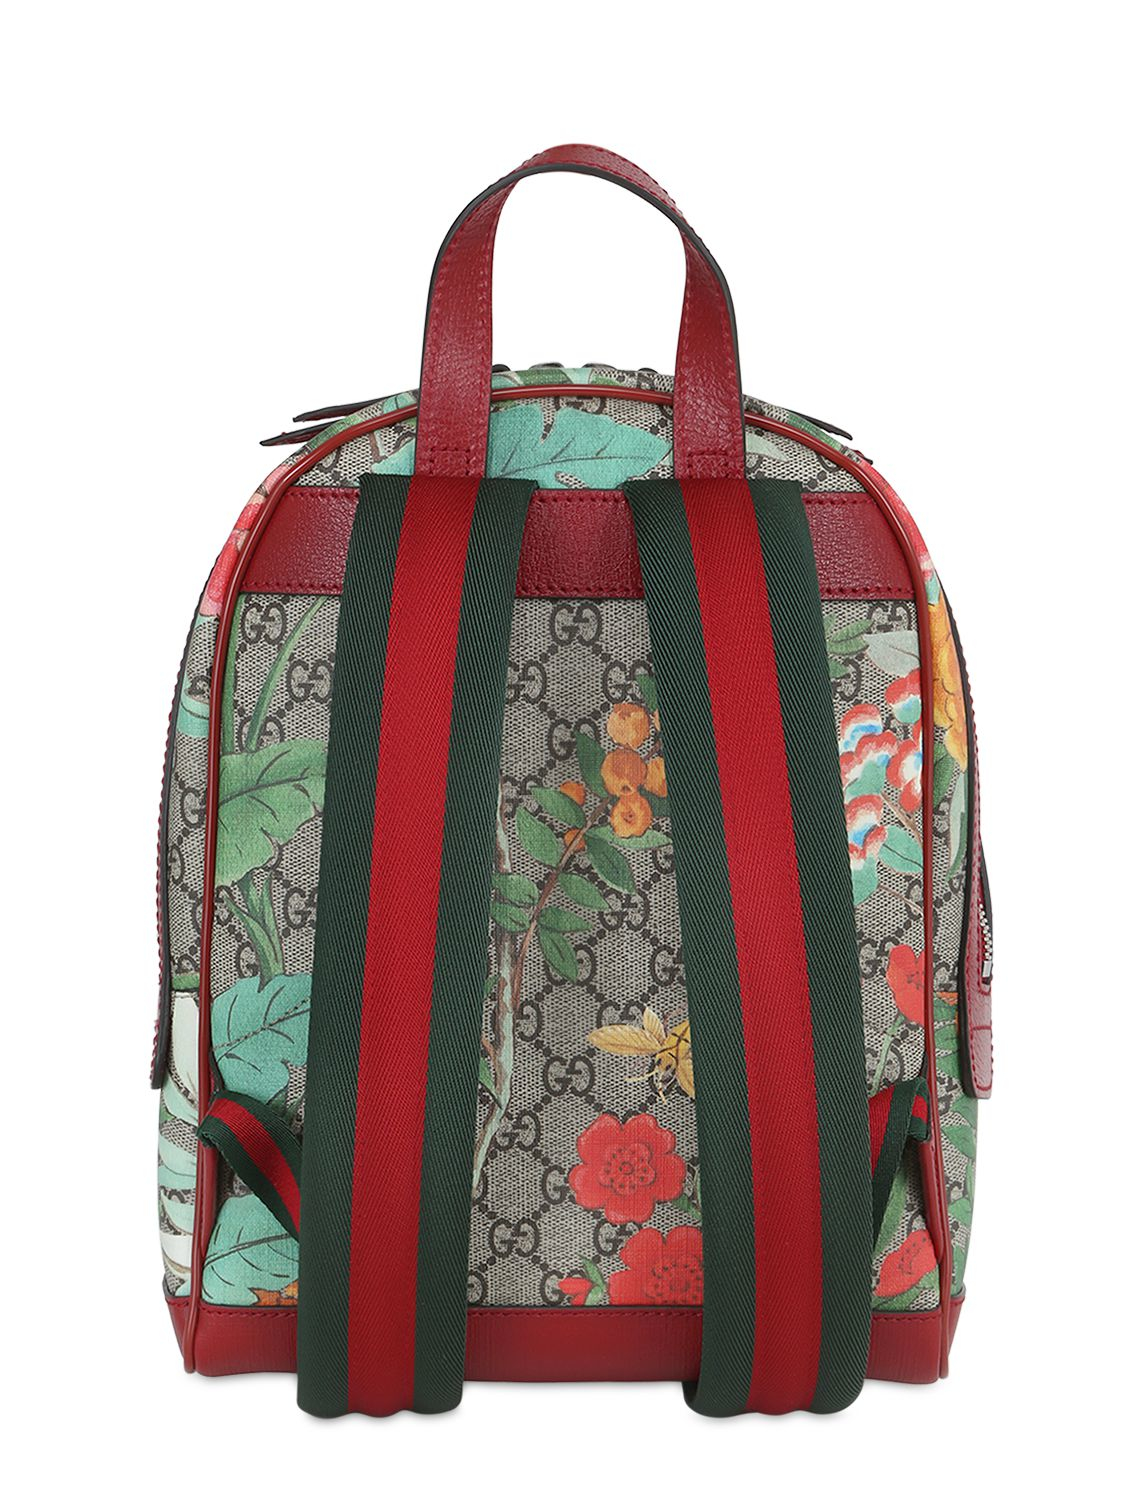 Gucci Tian GG Supreme Leather Backpack for Men - Lyst